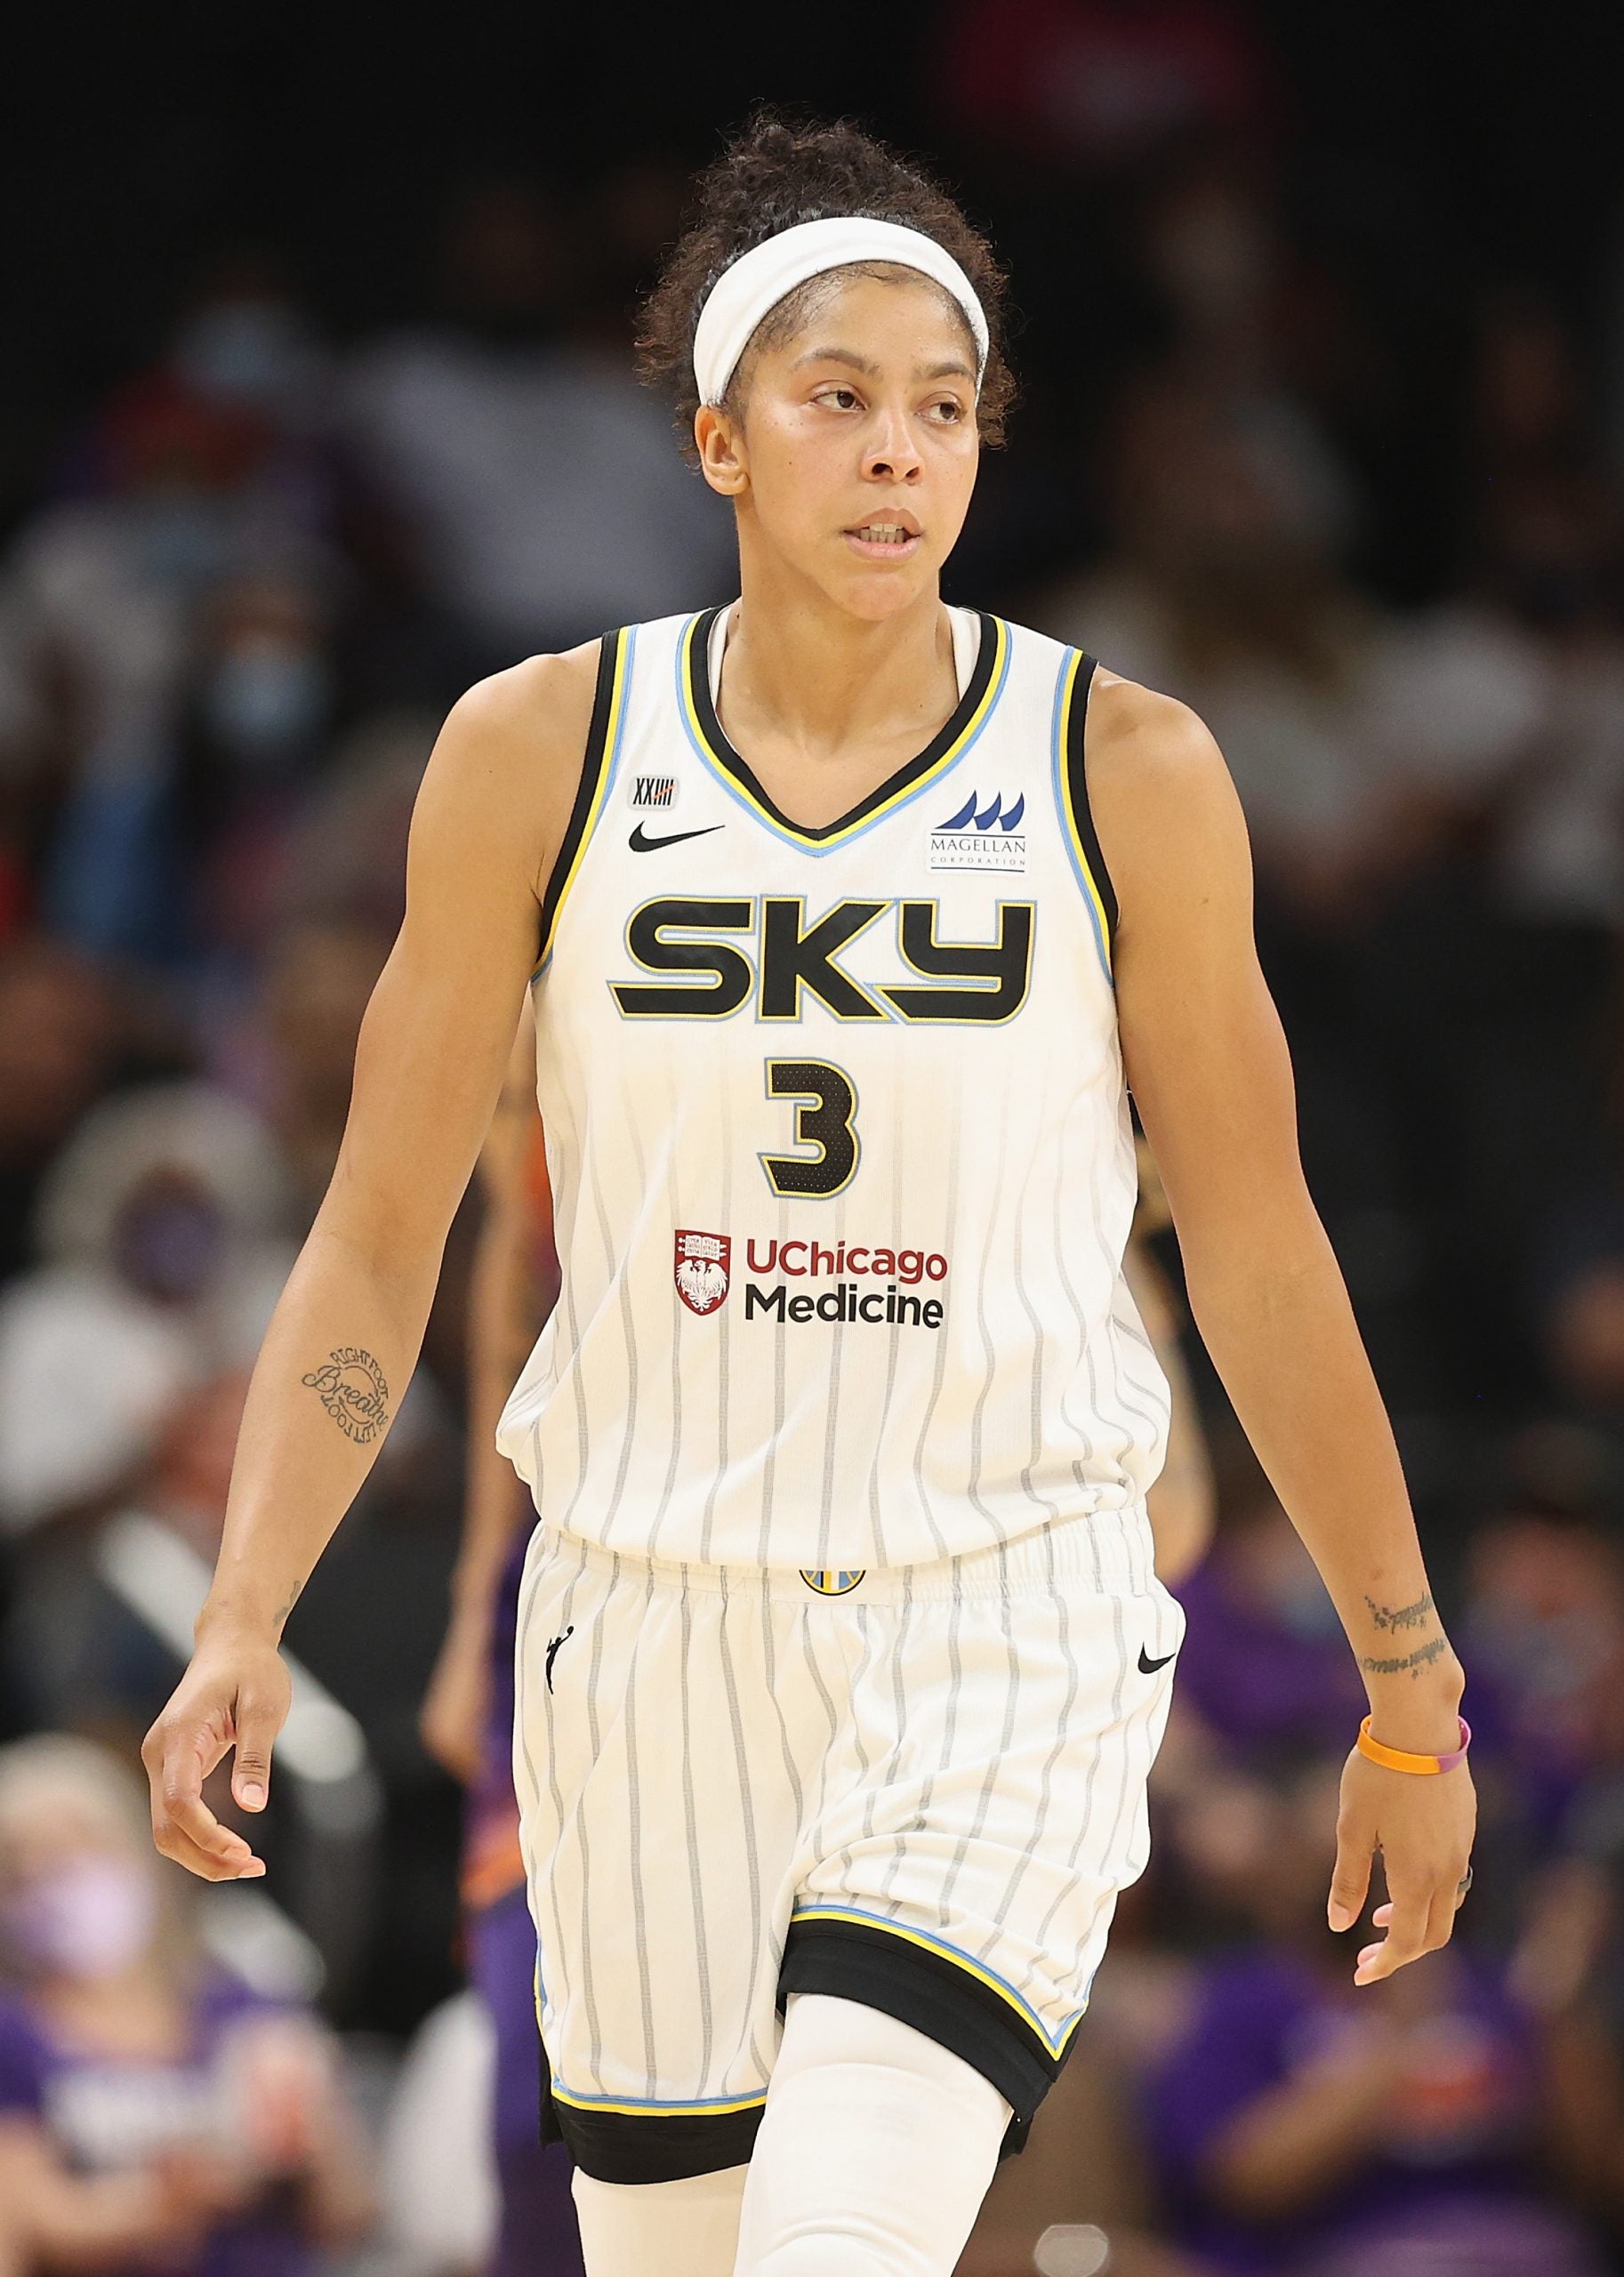 2021 WNBA Finals - Candace Parker's legacy comes full circle as